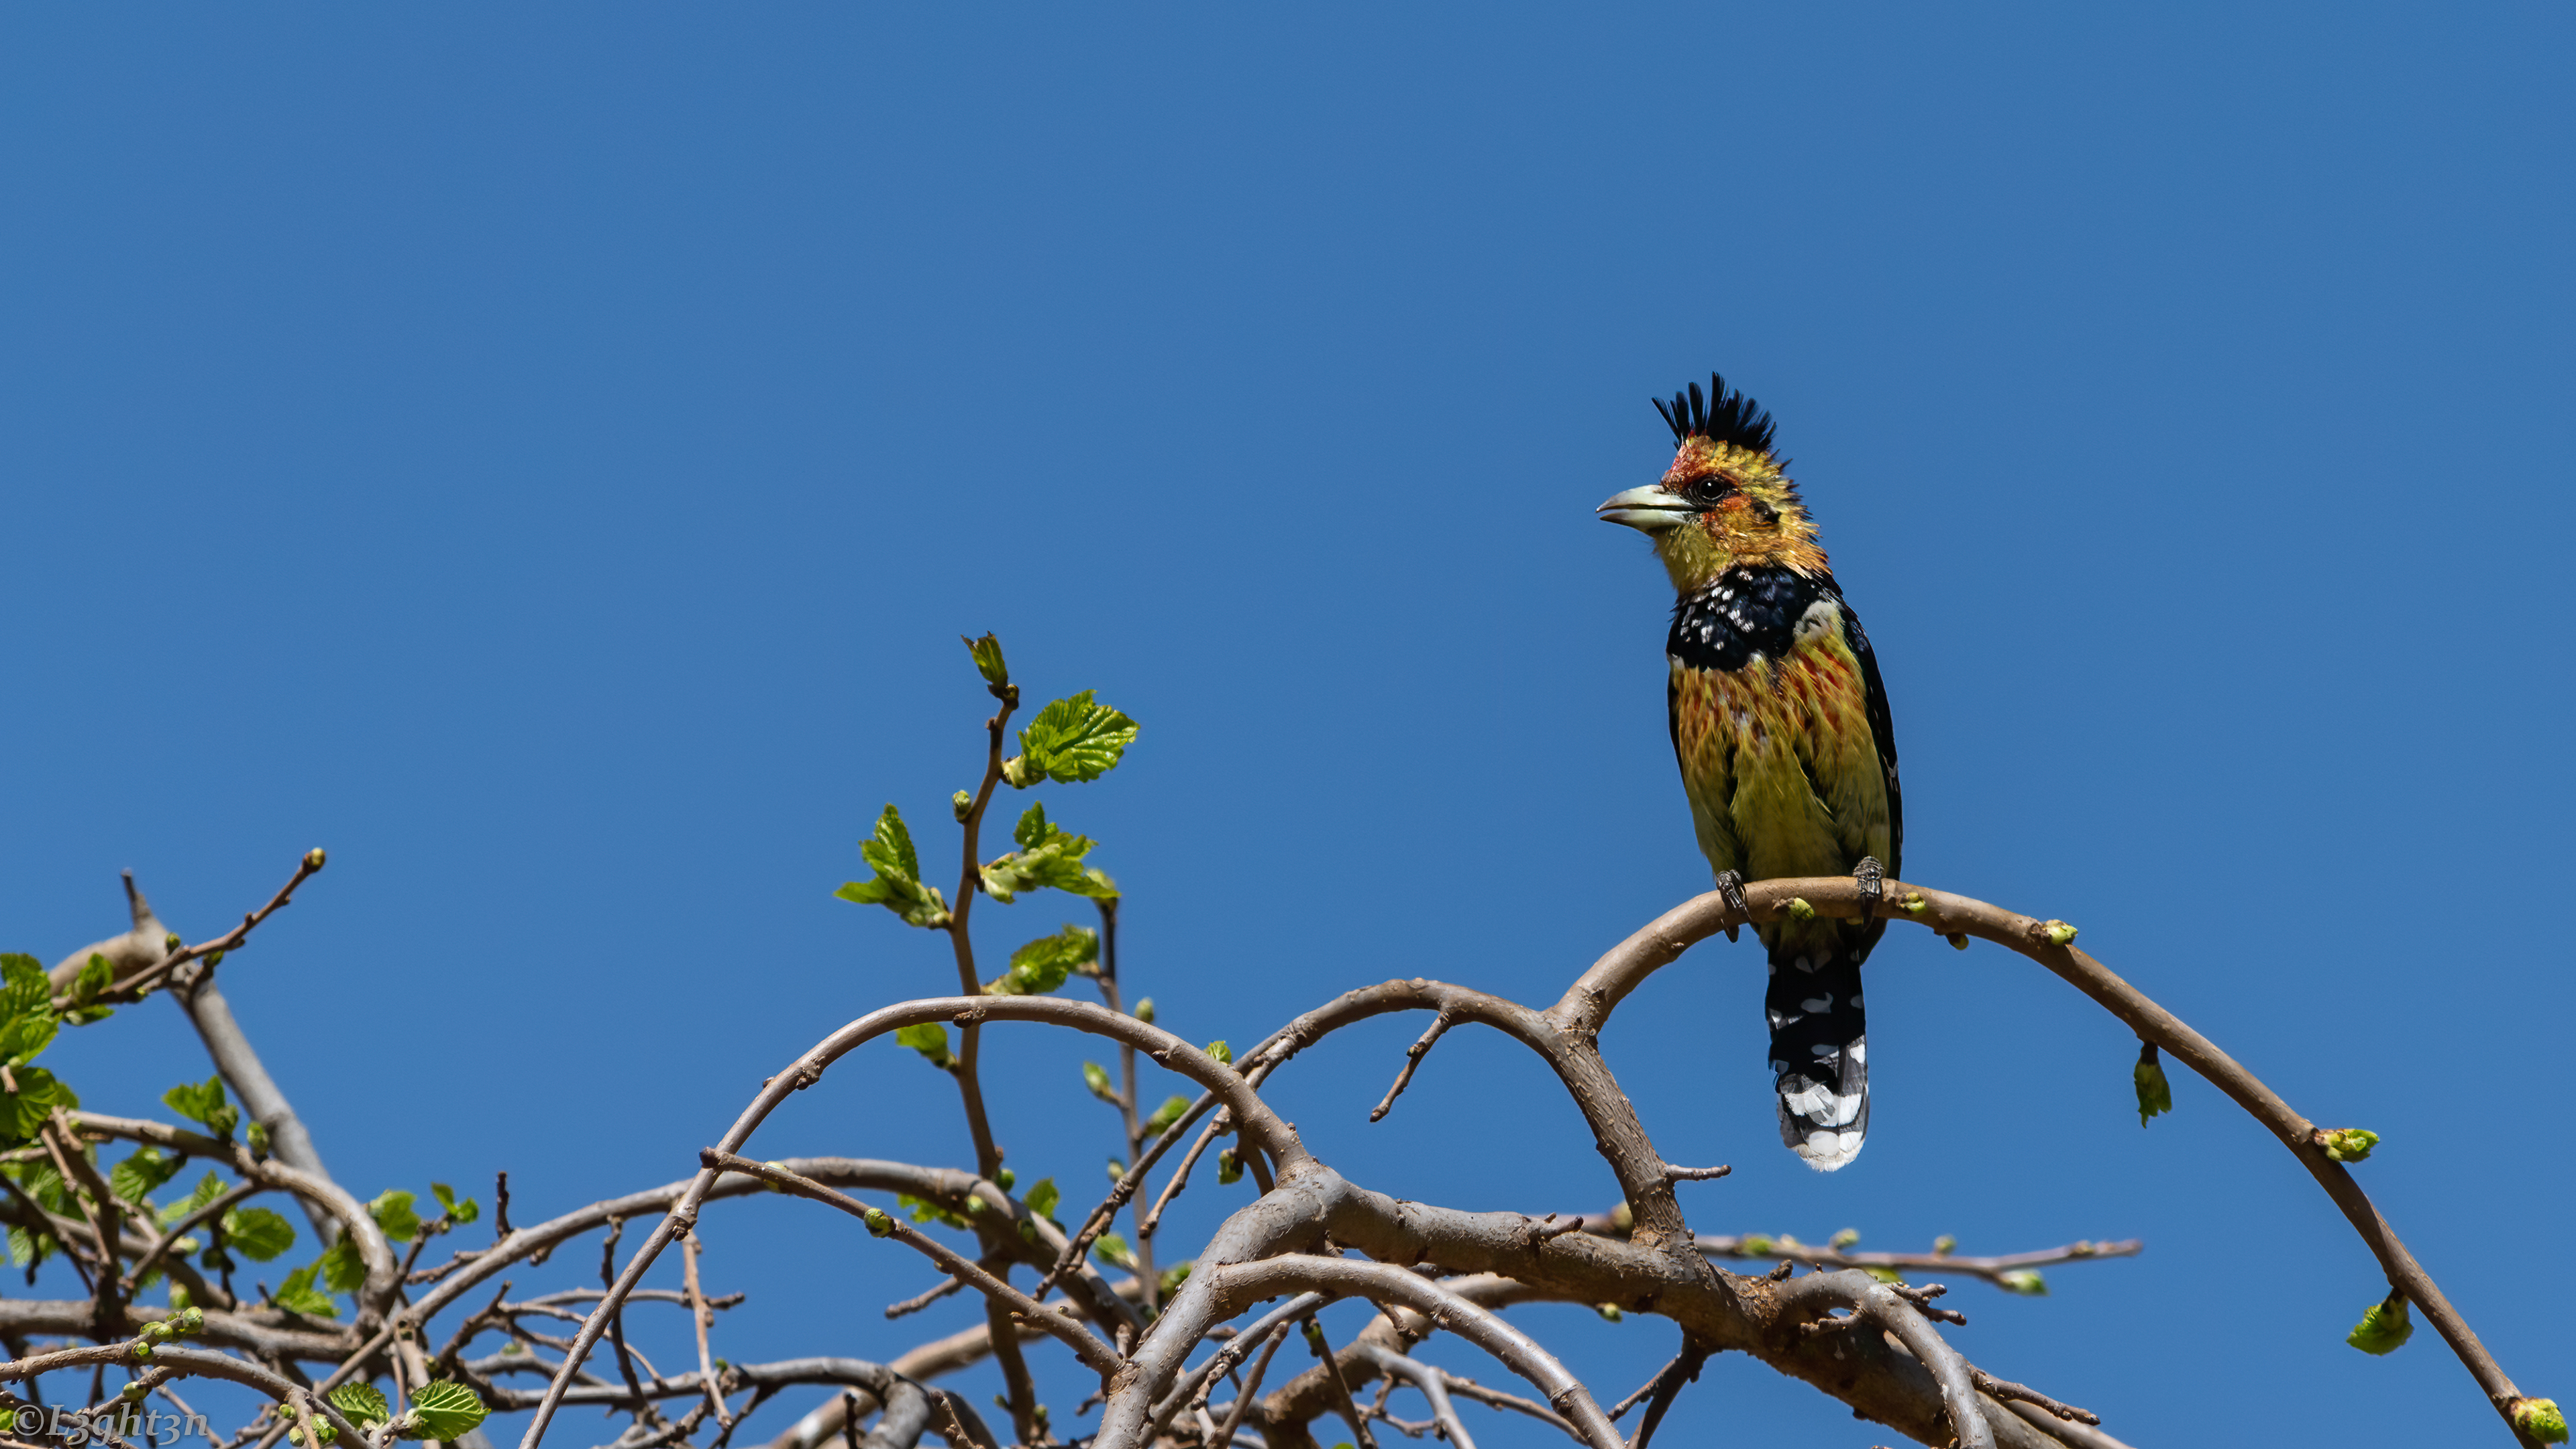 General 3840x2160 woodpeckers photography birds nature sky trees